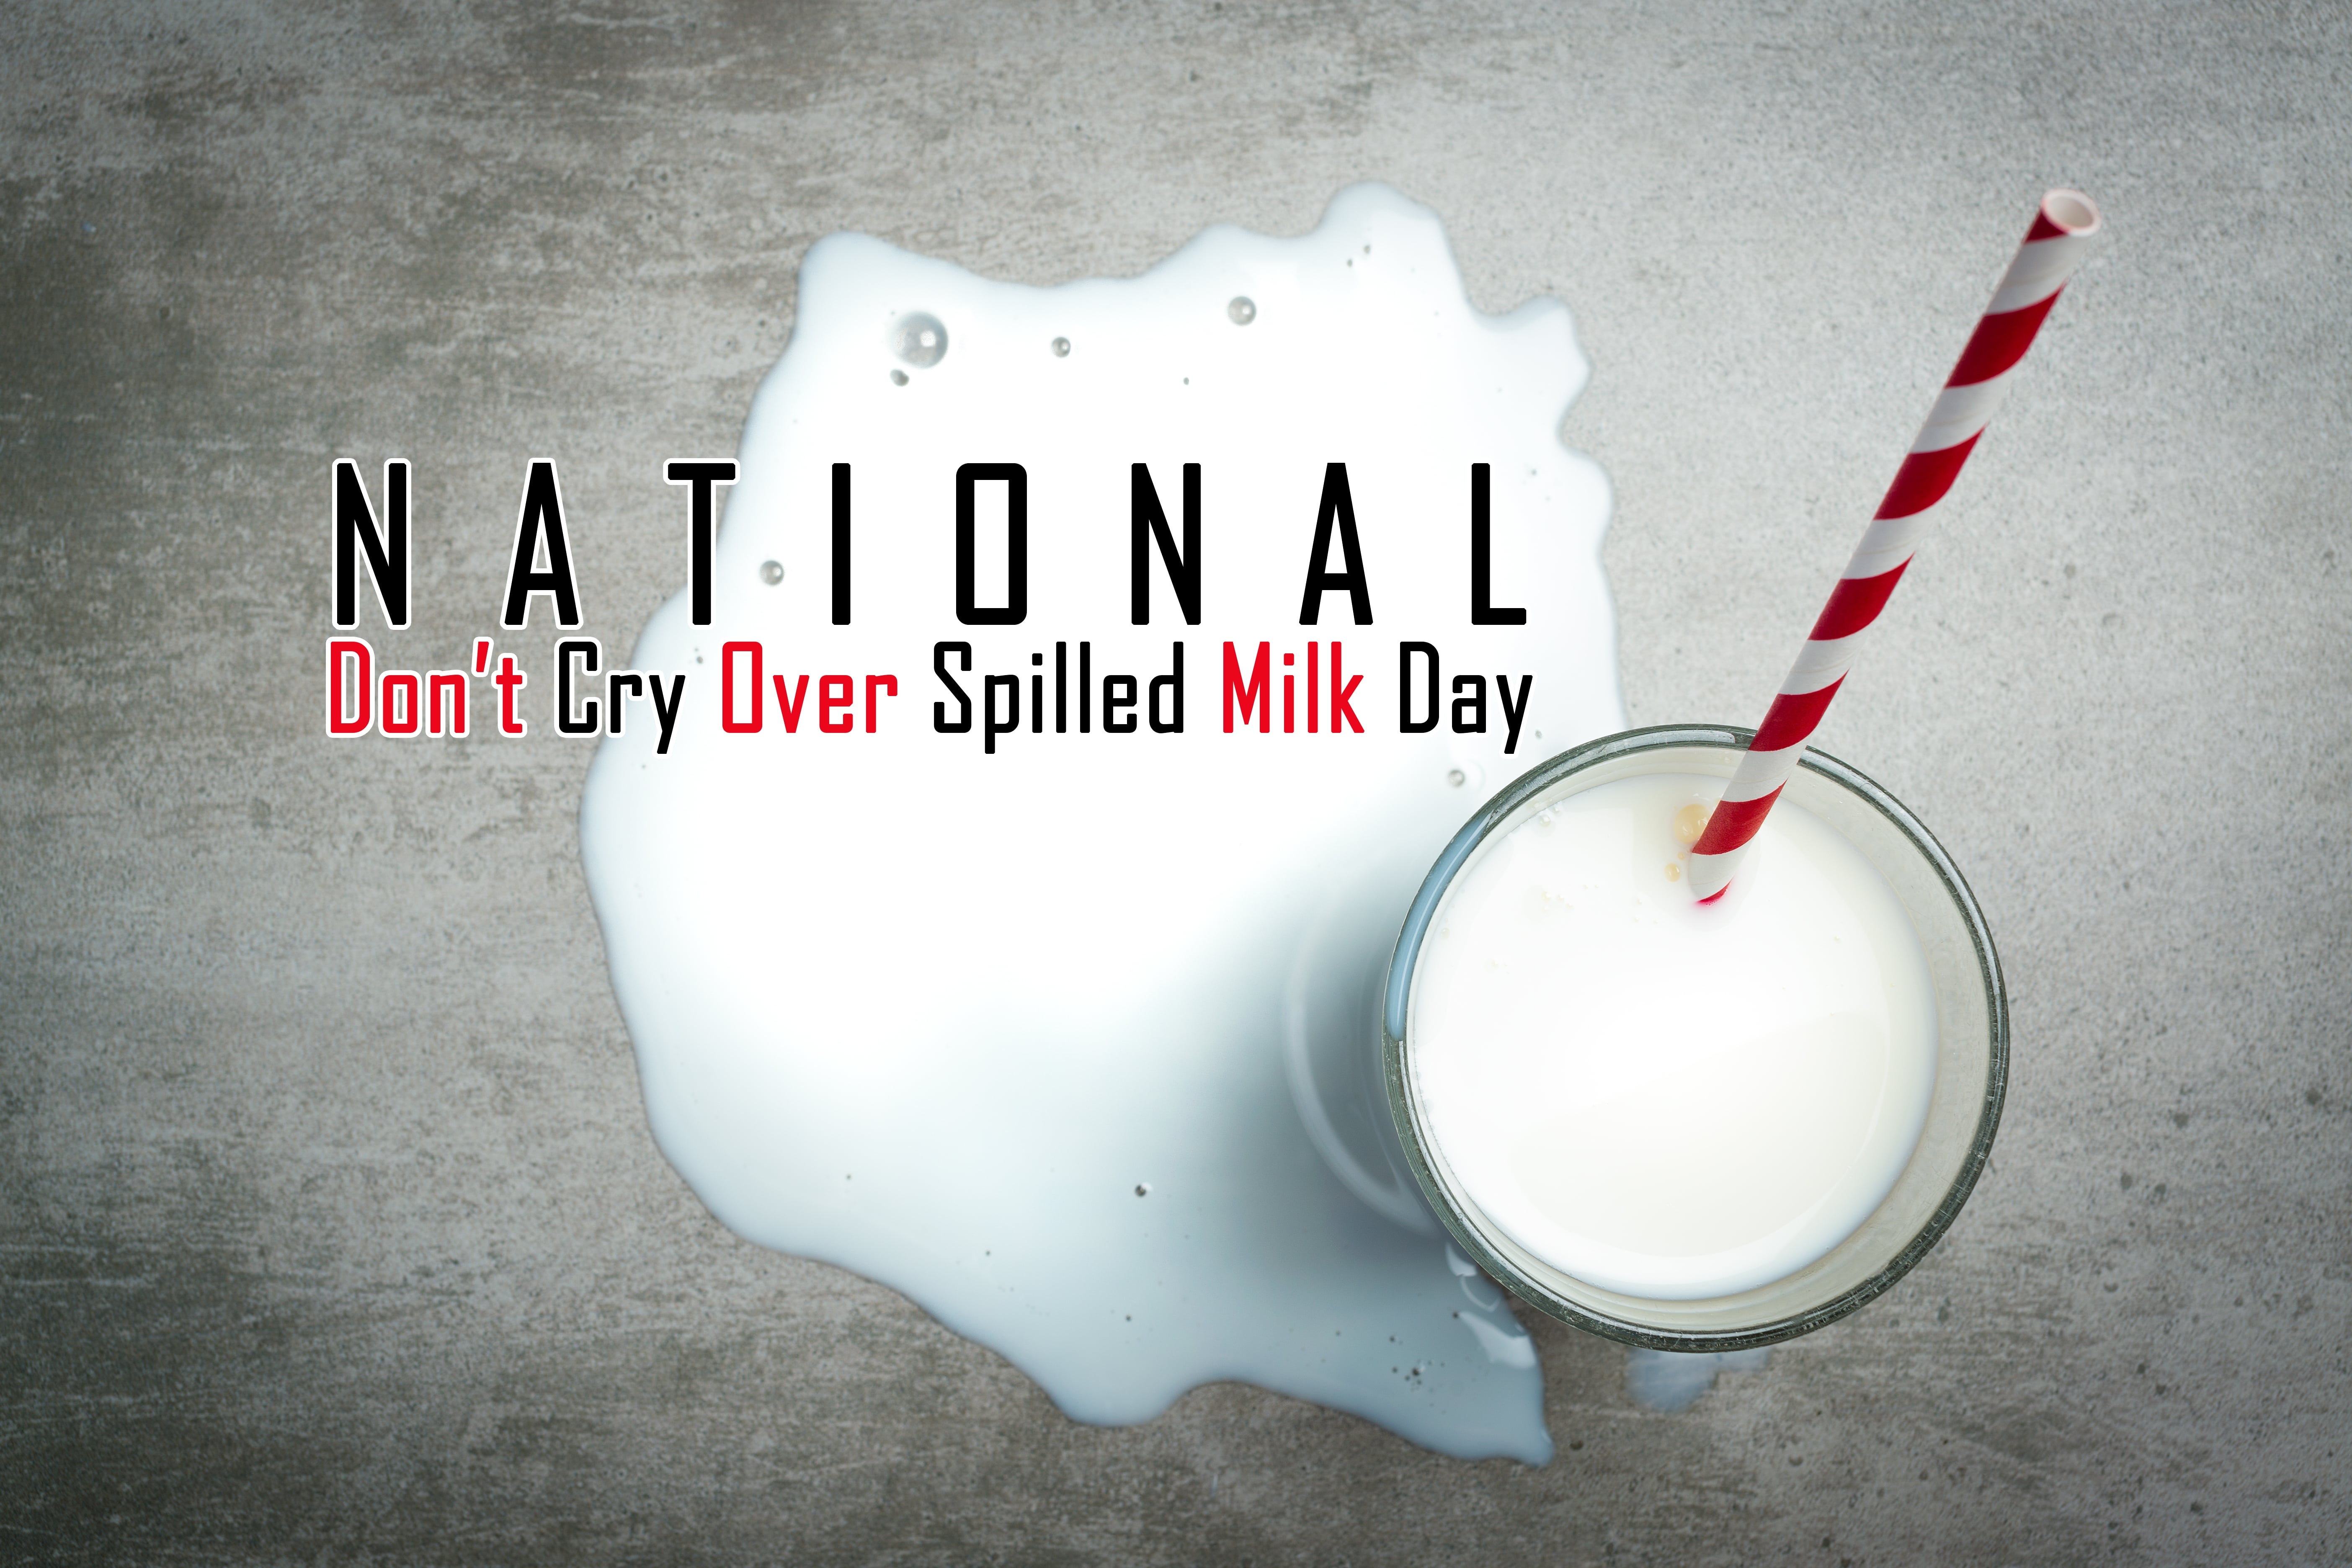 National Dont Cry Over Spilled Milk Day February 11th The